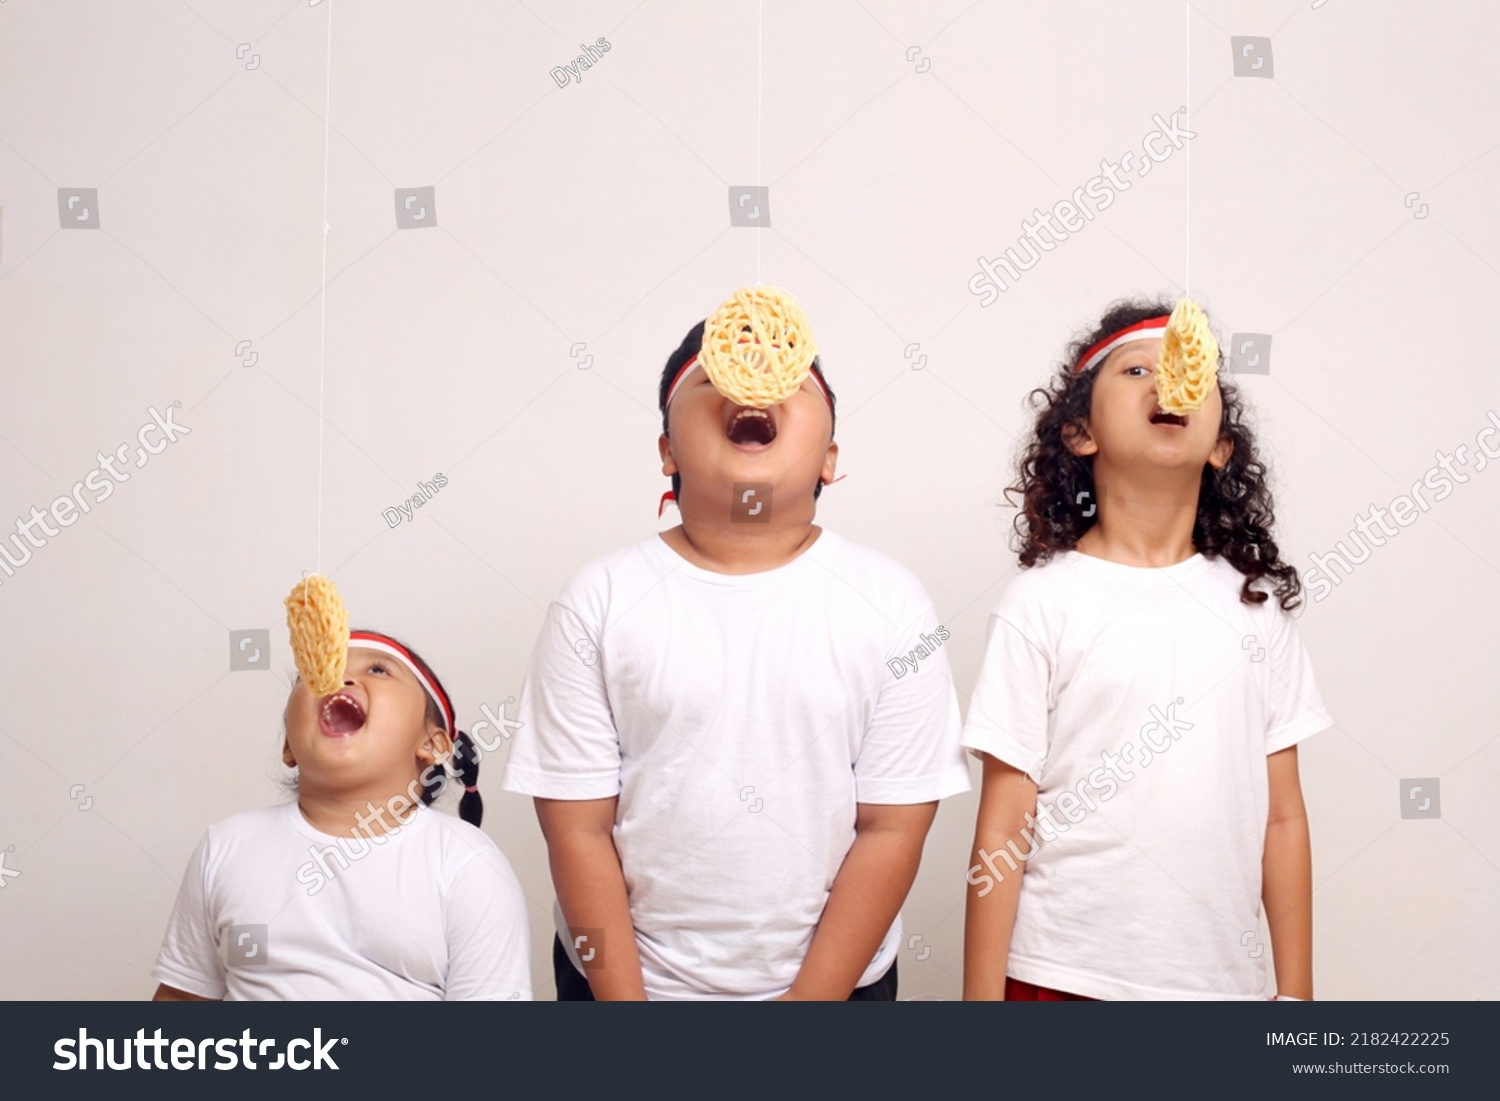 Asian kids celebrating indonesian independence day with cracker eating contest. #2182422225